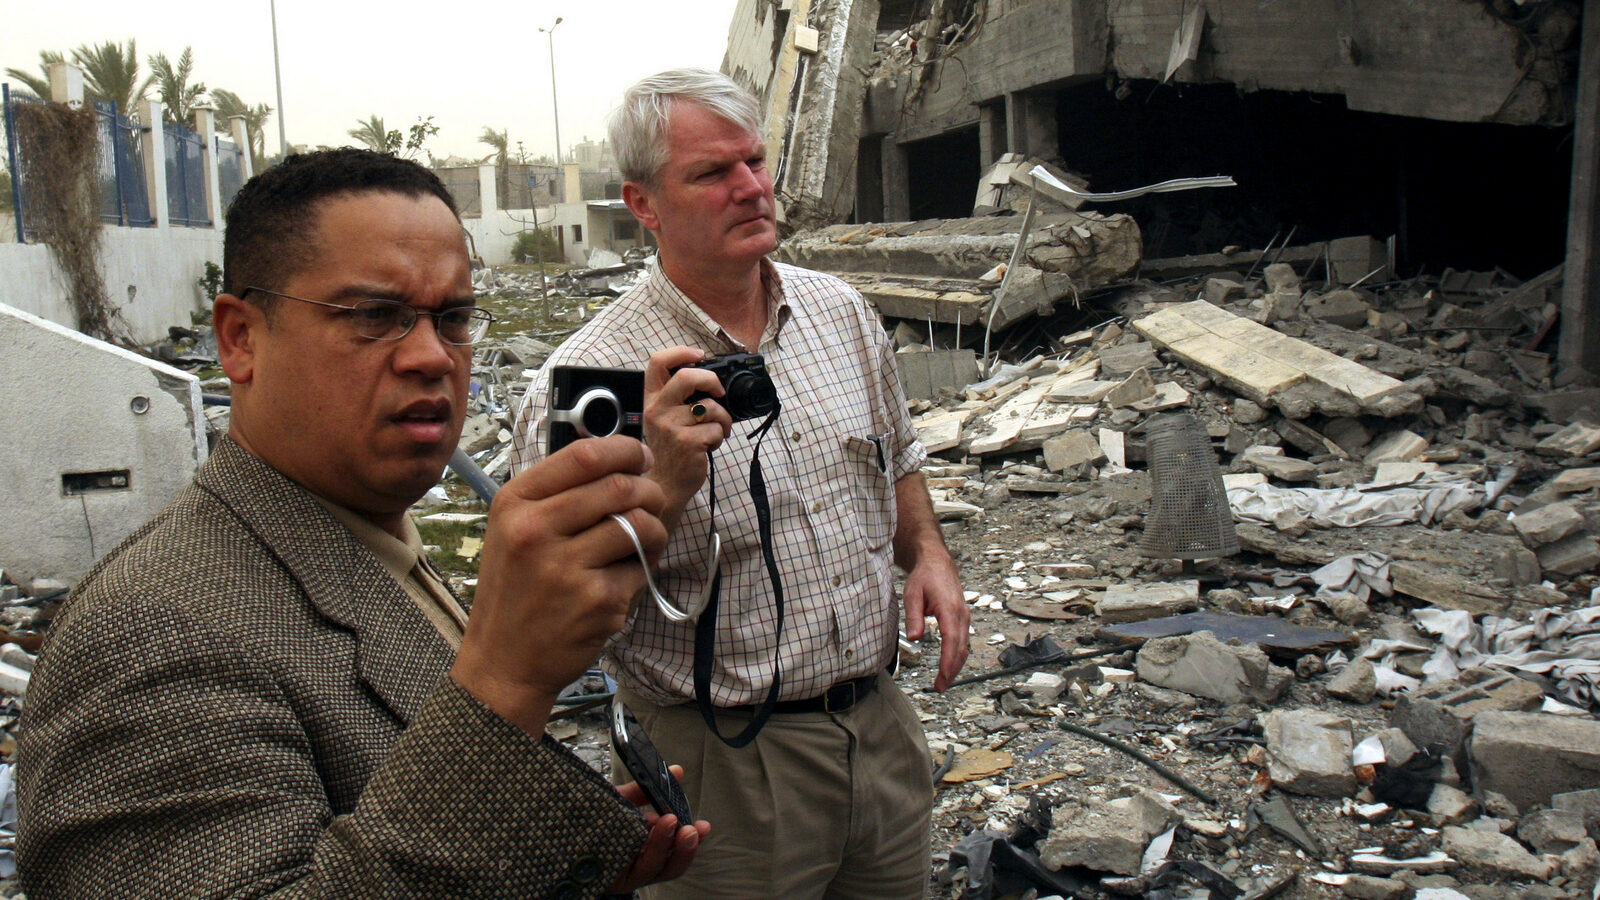 U.S. Rep. Keith Ellison, D-Minn., left and U.S. Rep. Brian Baird, D-Wash., right, take photos of the rubble of the American International school in Beit Lahiya in the northern of Gaza Strip, Thursday, Feb. 19, 2009. (AP Photo/Adel Hana)